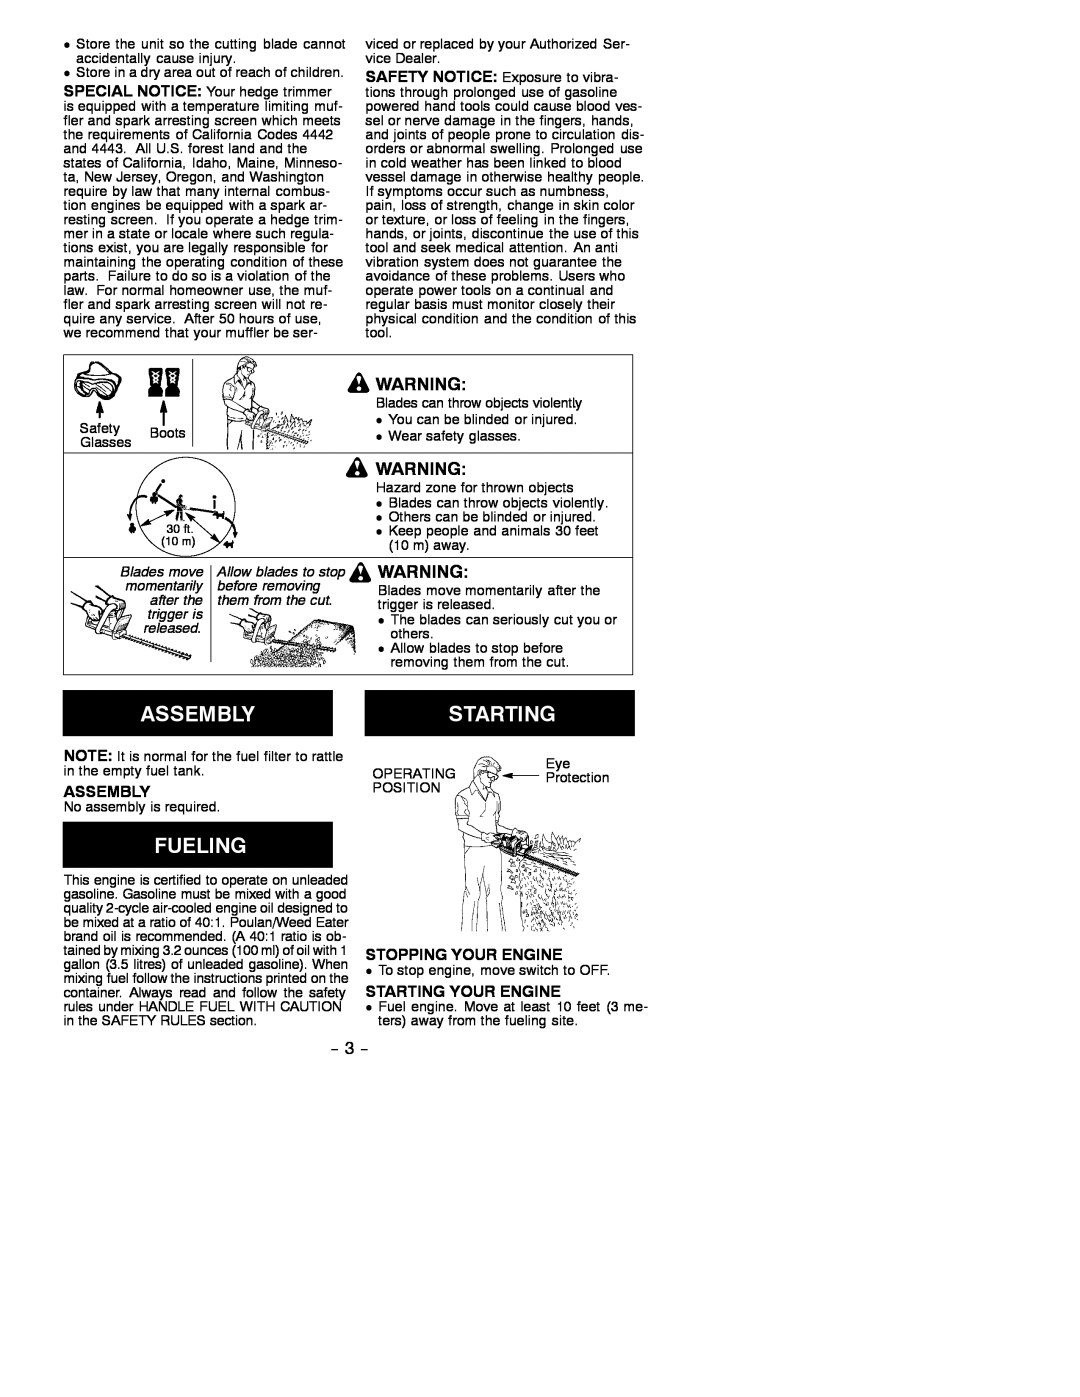 Poulan GHT 180 manual Assembly, Stopping Your Engine, Starting Your Engine, Blades move, Allow blades to stop, momentarily 